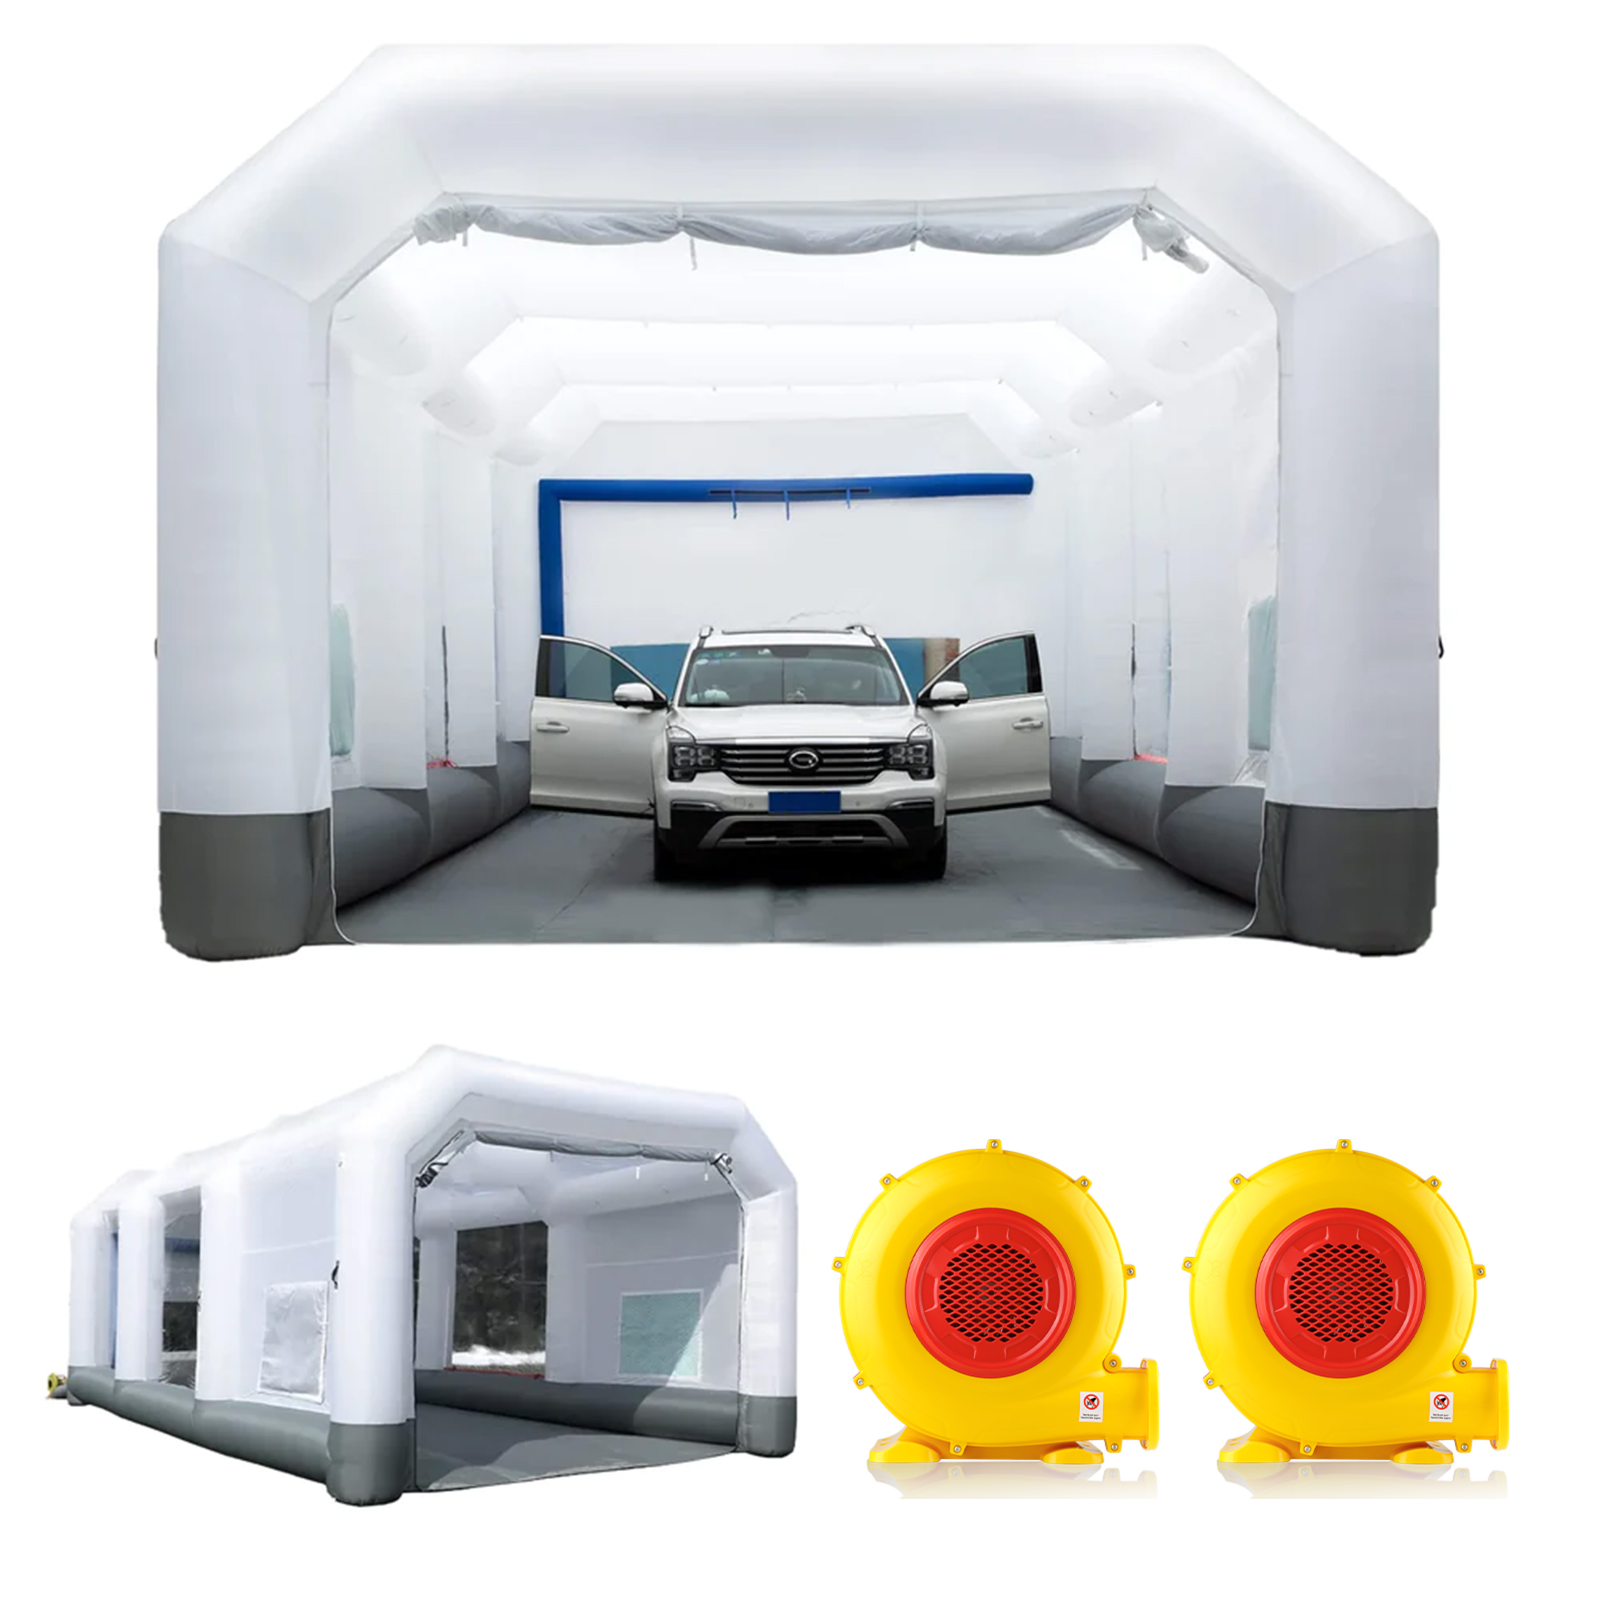 GORILLASPRO Inflatable Paint Booth 33X20X15Ft with 2 Blowers (750W+1100W) Large Inflatable Spray Booth More Durable,Perfect for SUV & Semi-trunk